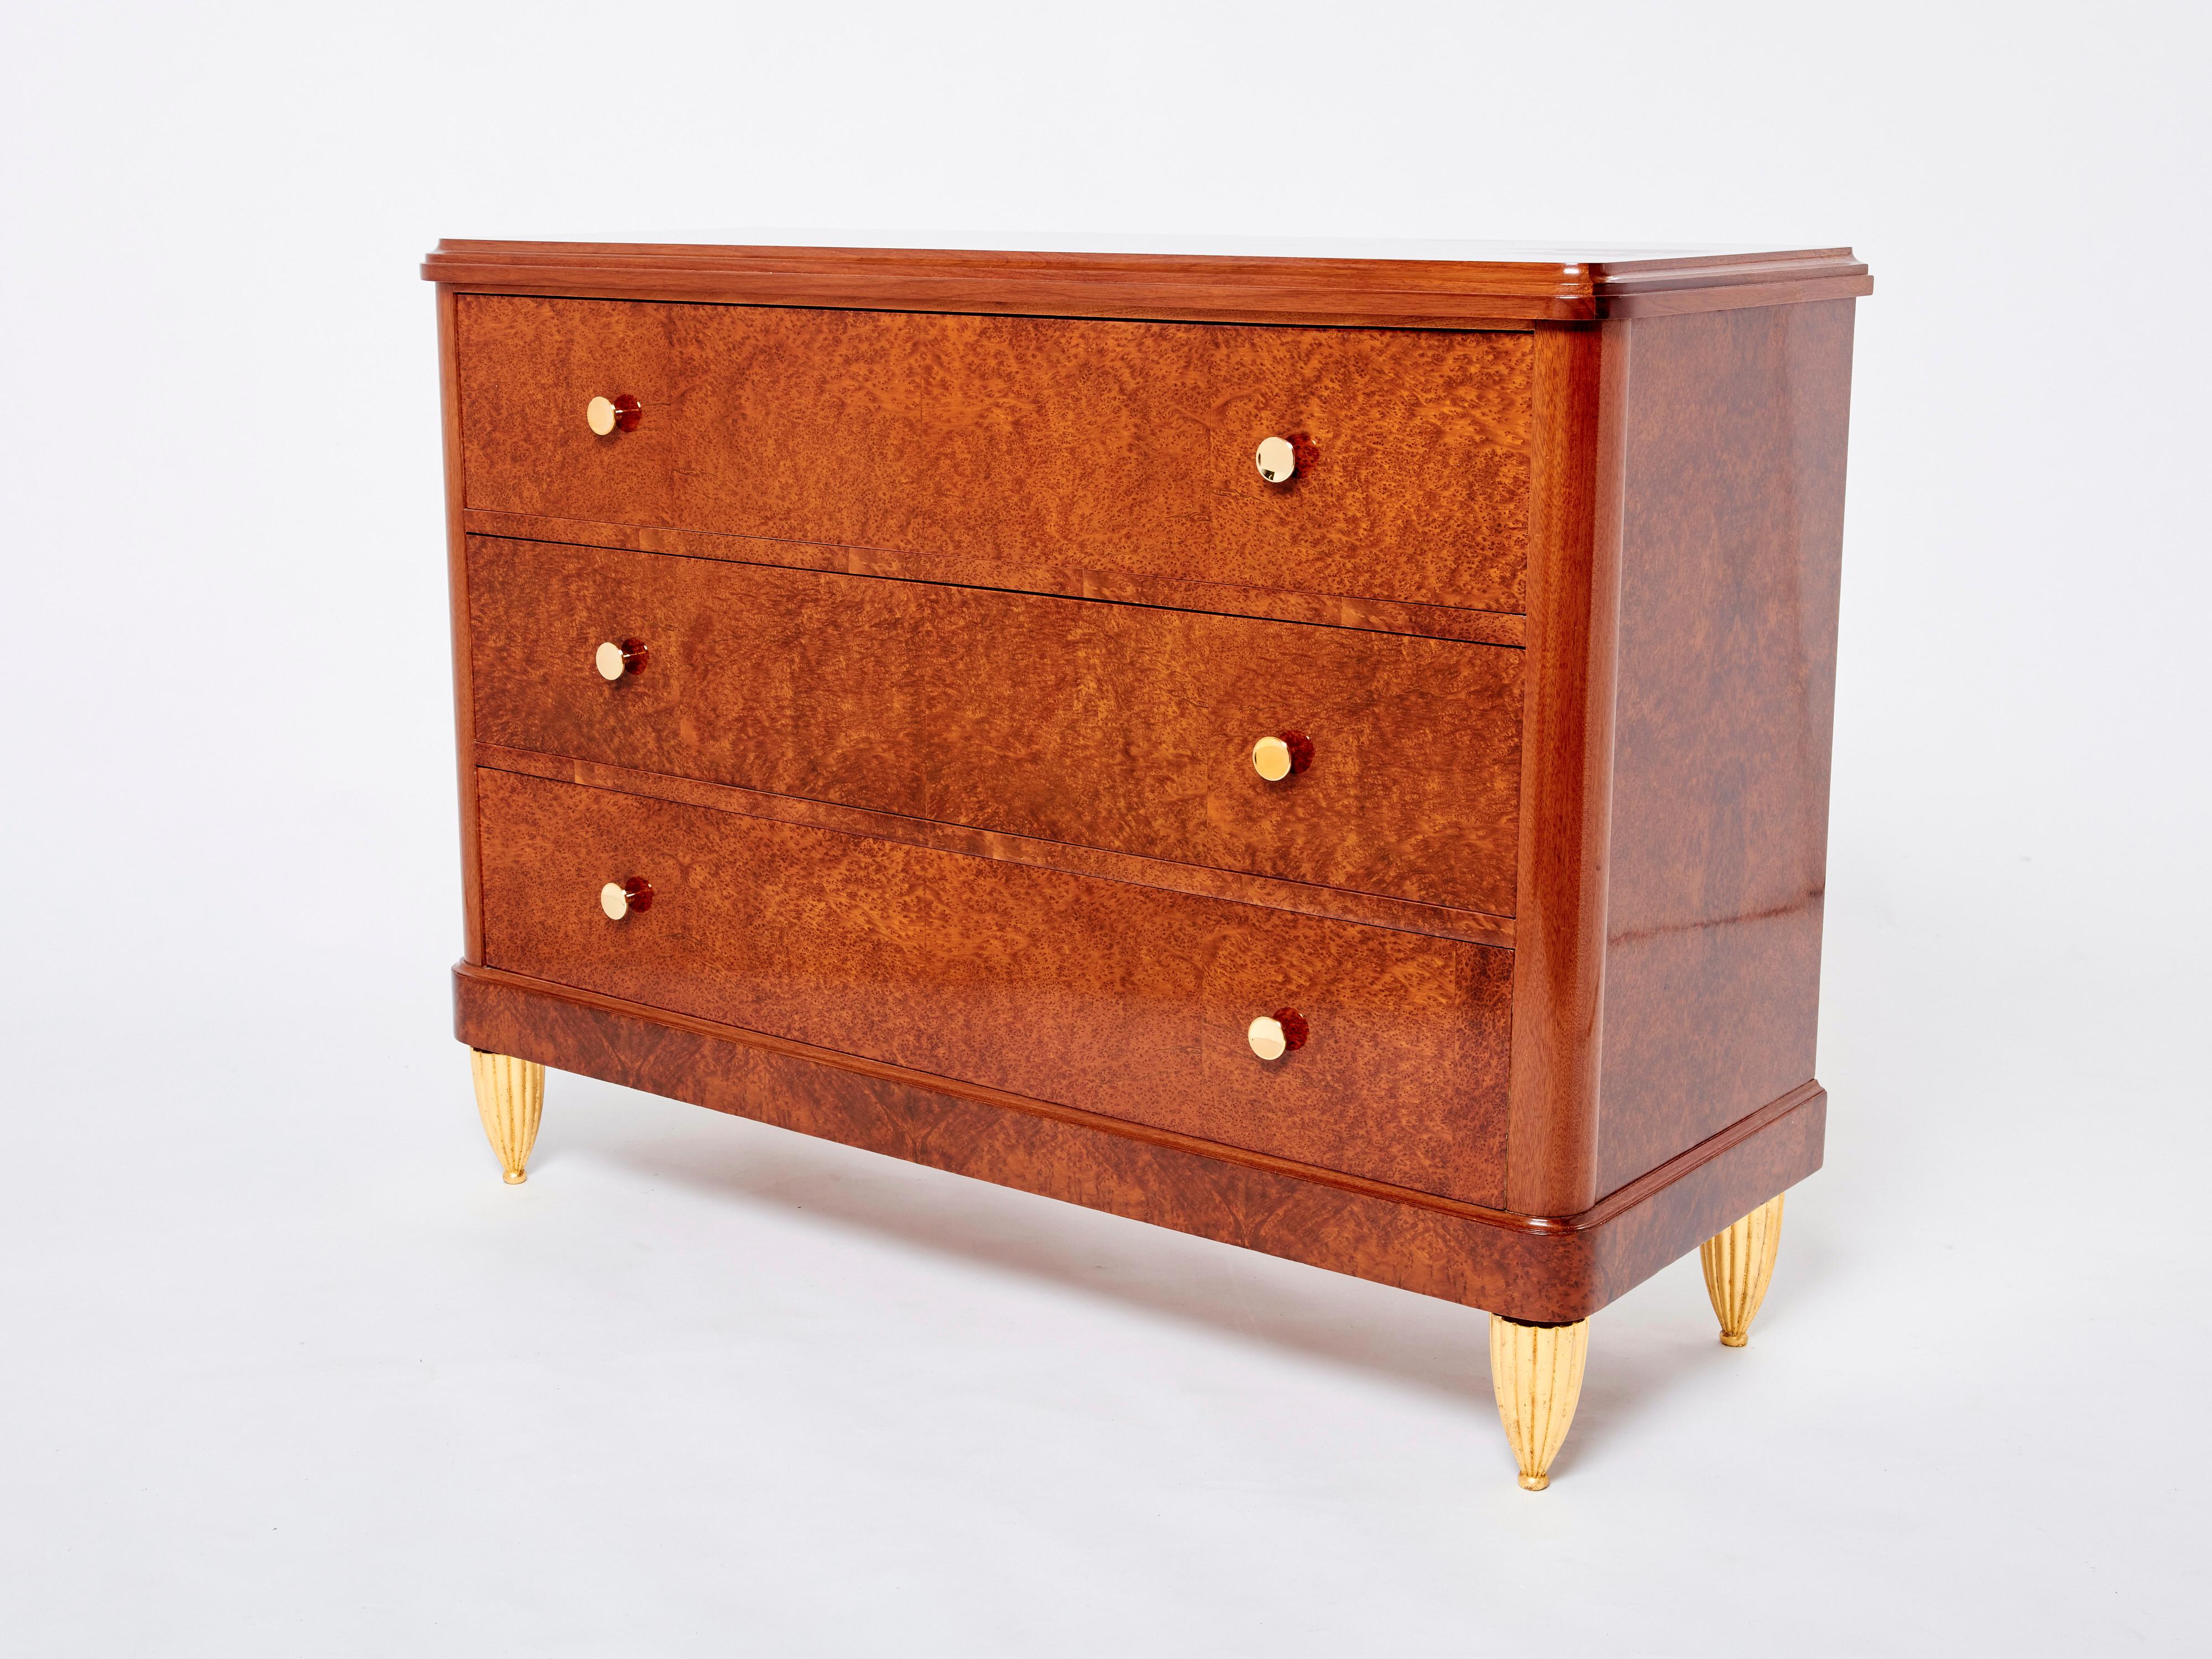 This beautiful 1940s Art Deco chest of drawers attributed to Maurice Dufrène imparts a cosy, glowing mood to any space. The warm amboyna burl wood remains looking healthy and smooth some eighty years later. Gilded carved feet and solid brass handles